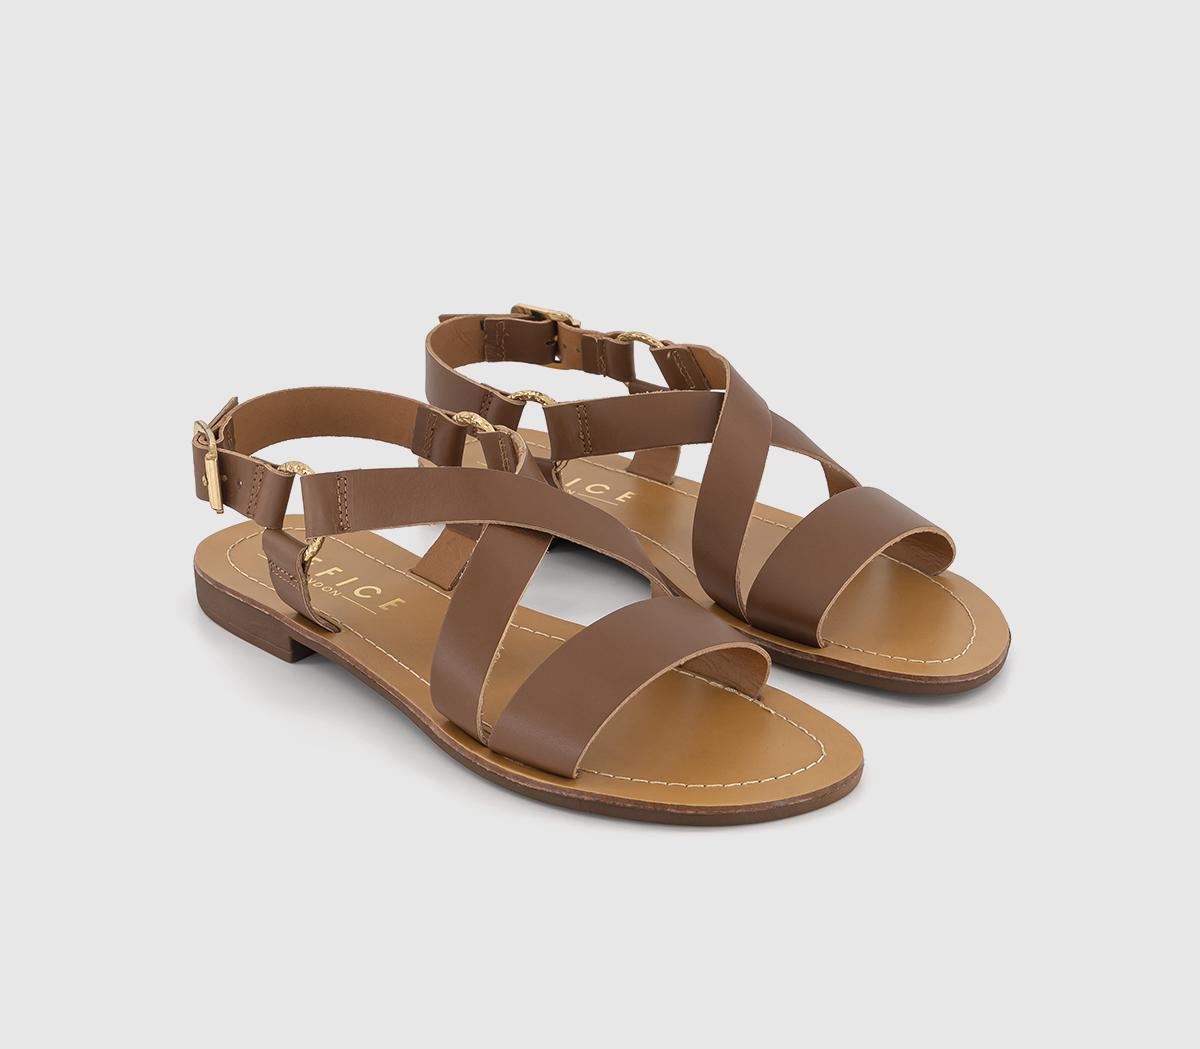 OFFICE Womens Sequence Cross Over Flat Sandals Tan Leather, 4